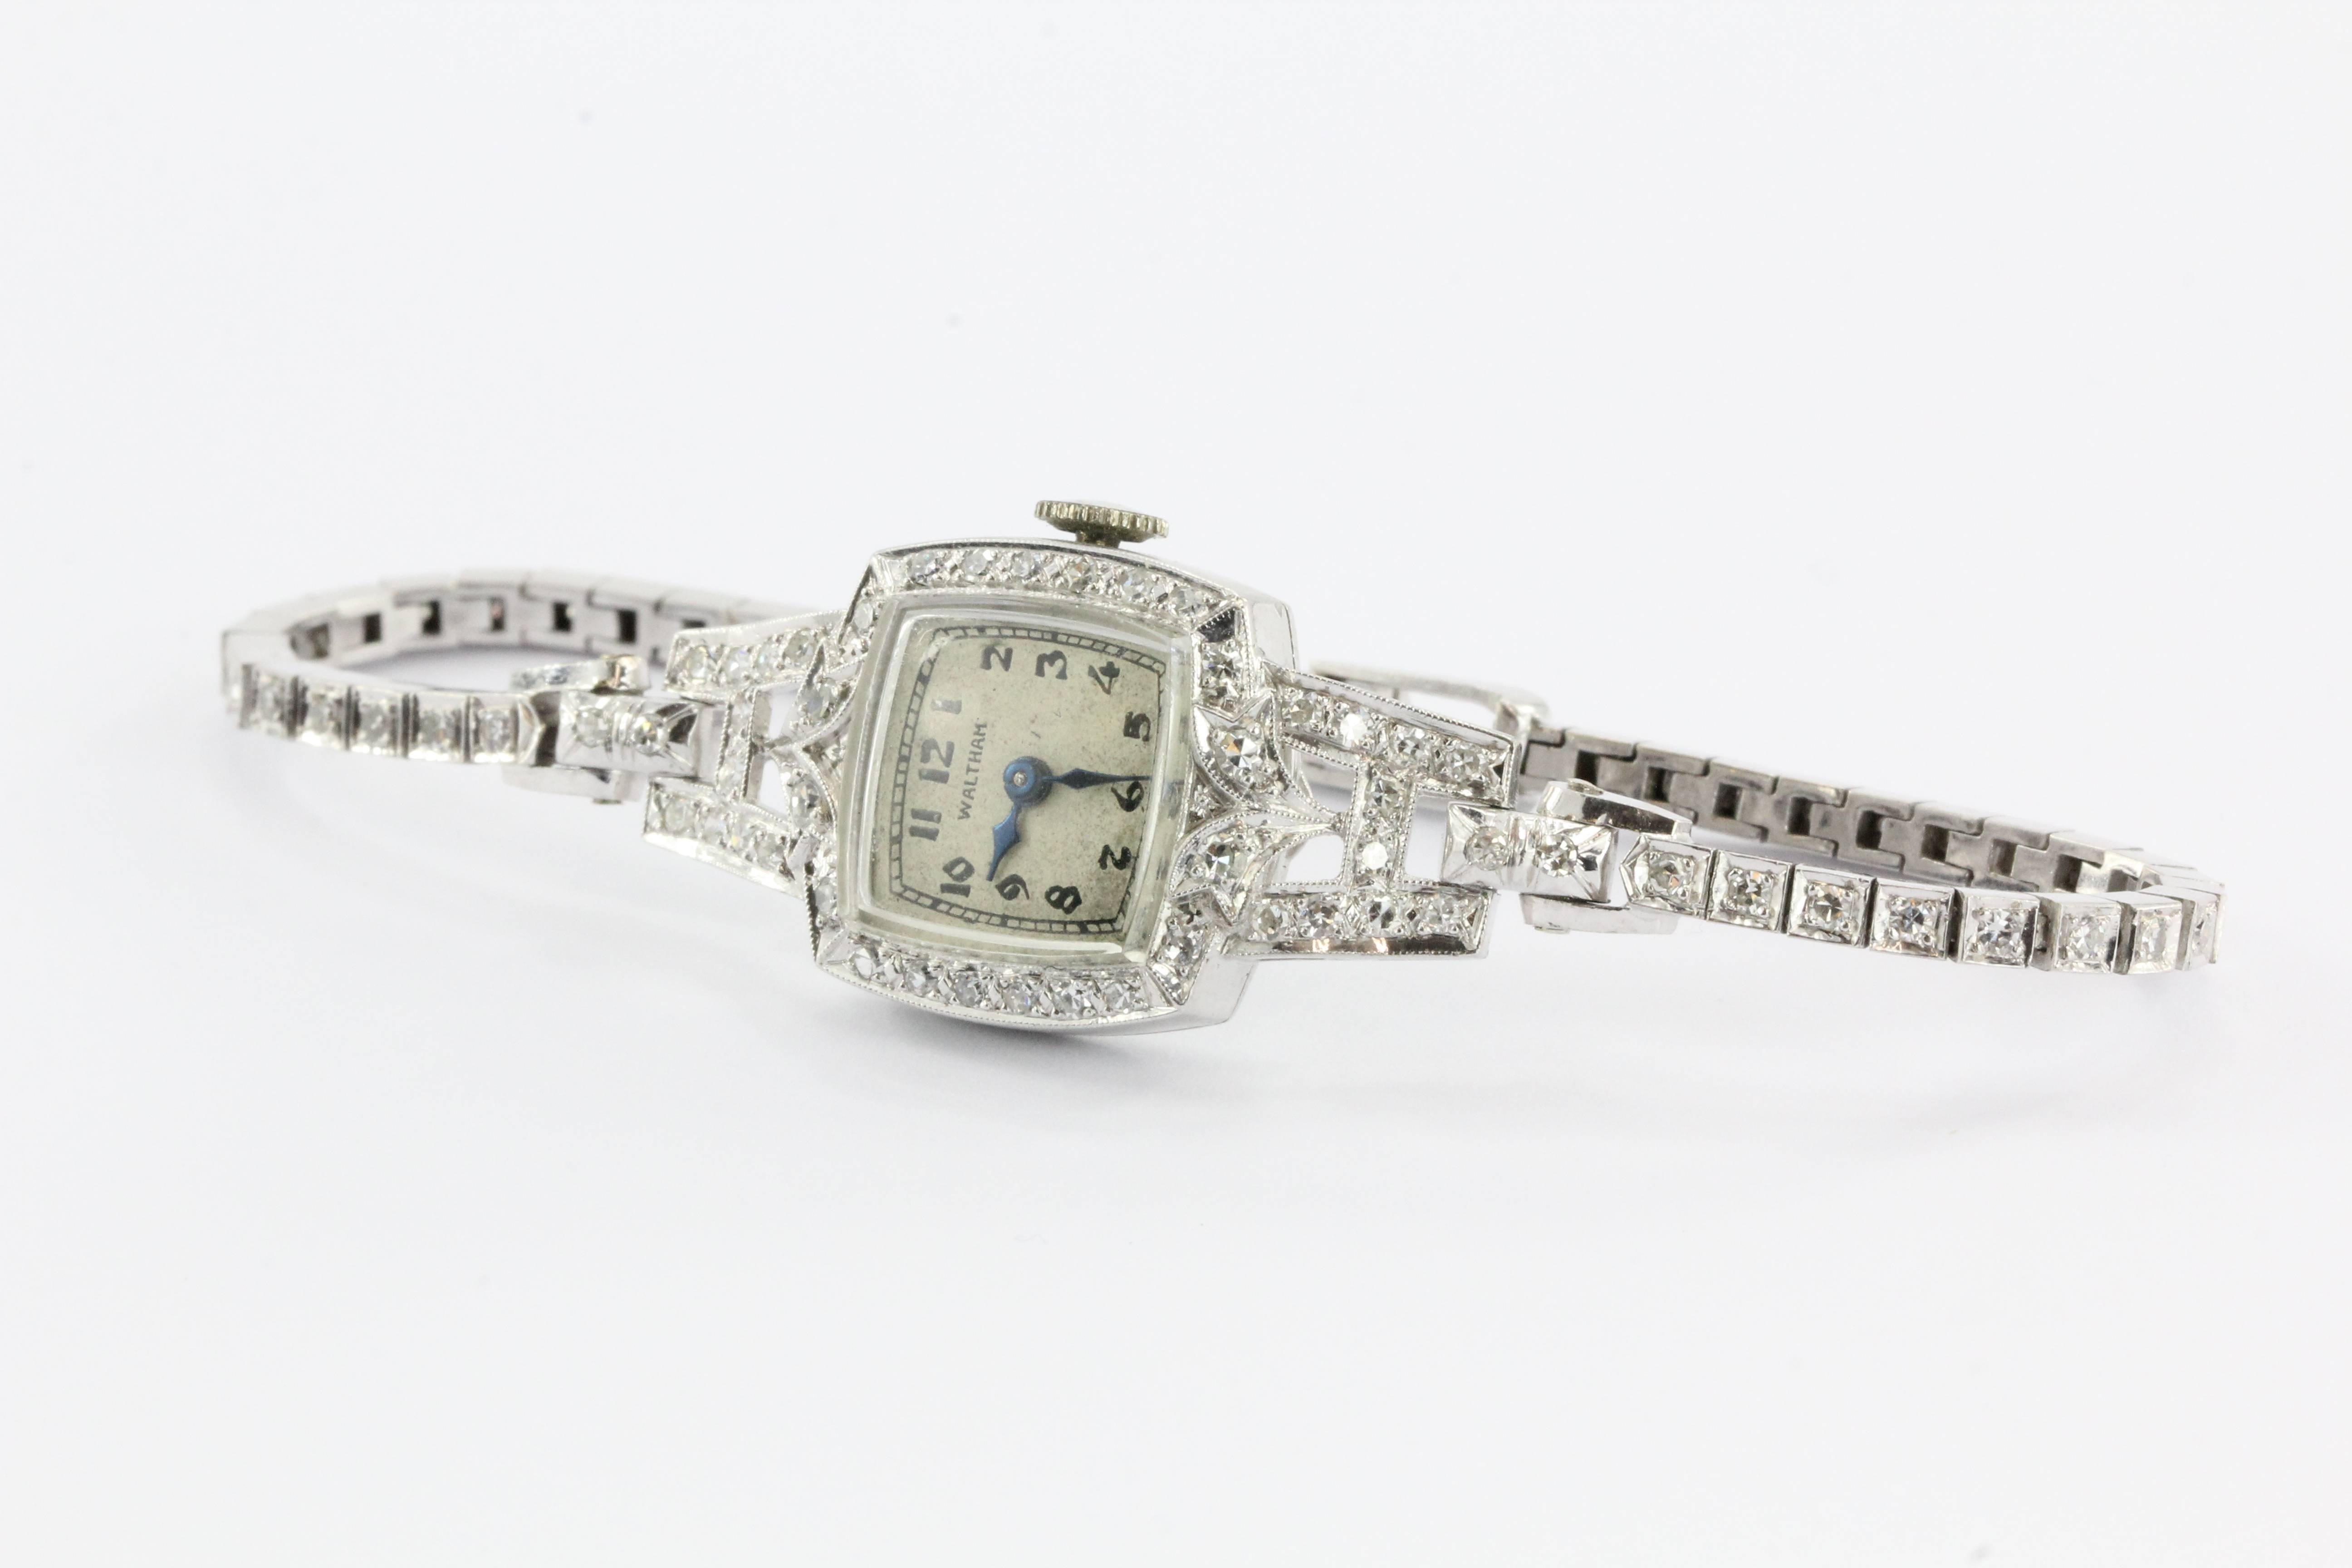 Antique Art Deco Platinum & 14K White Gold Diamond 17 Jewel Waltham Watch. The actual watch is not working and will need to be serviced. The case and band are in excellent condition. The case is made of 90% Platinum 10% Iridium and hallmarked